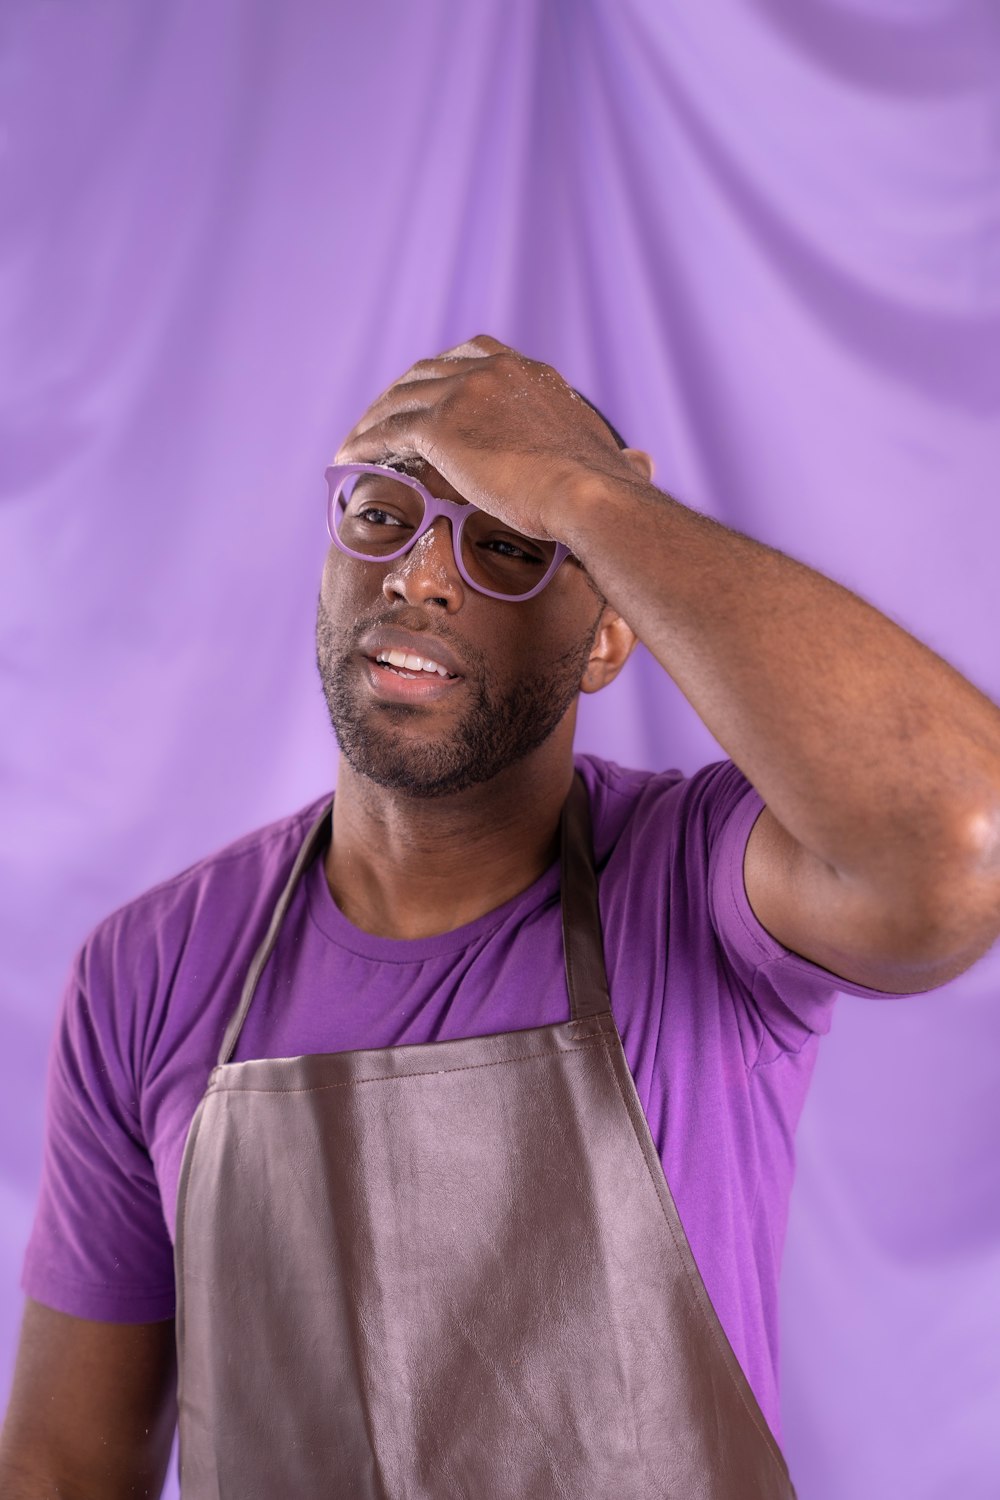 a man in a purple shirt is holding his head